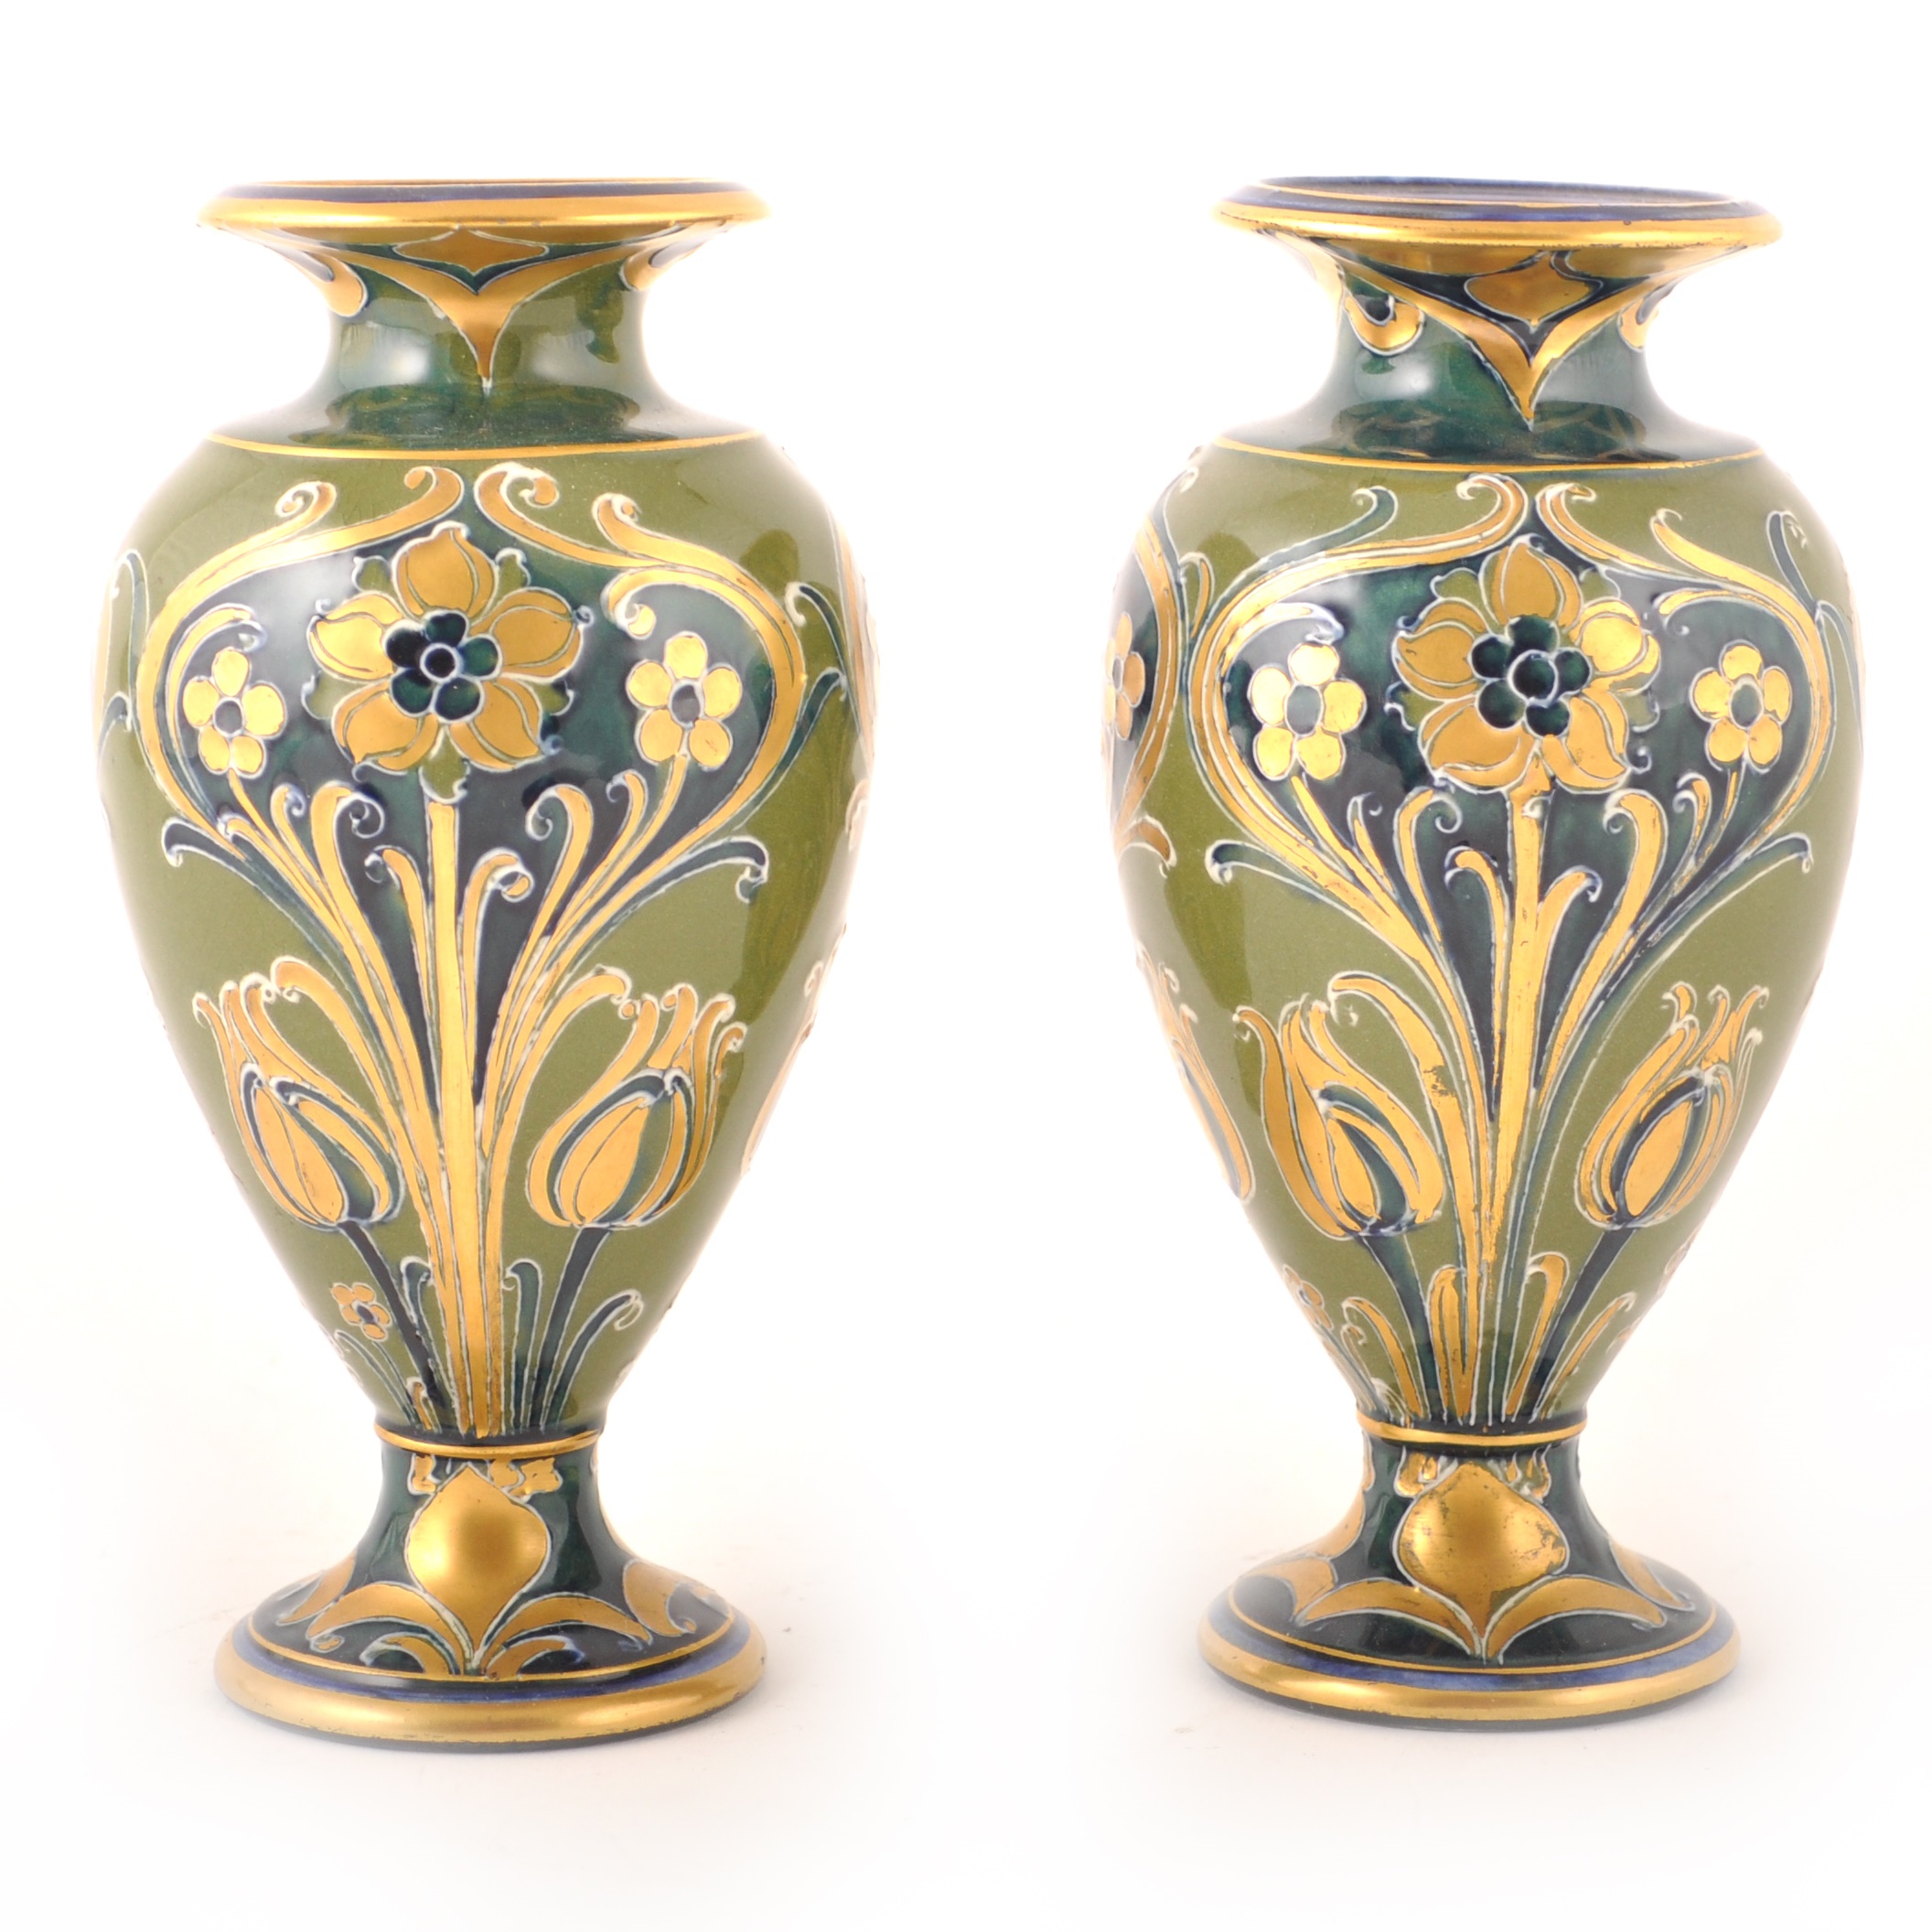 William Moorcroft for James Macintyre, a pair of 'Green and Gold' Florian Ware vases